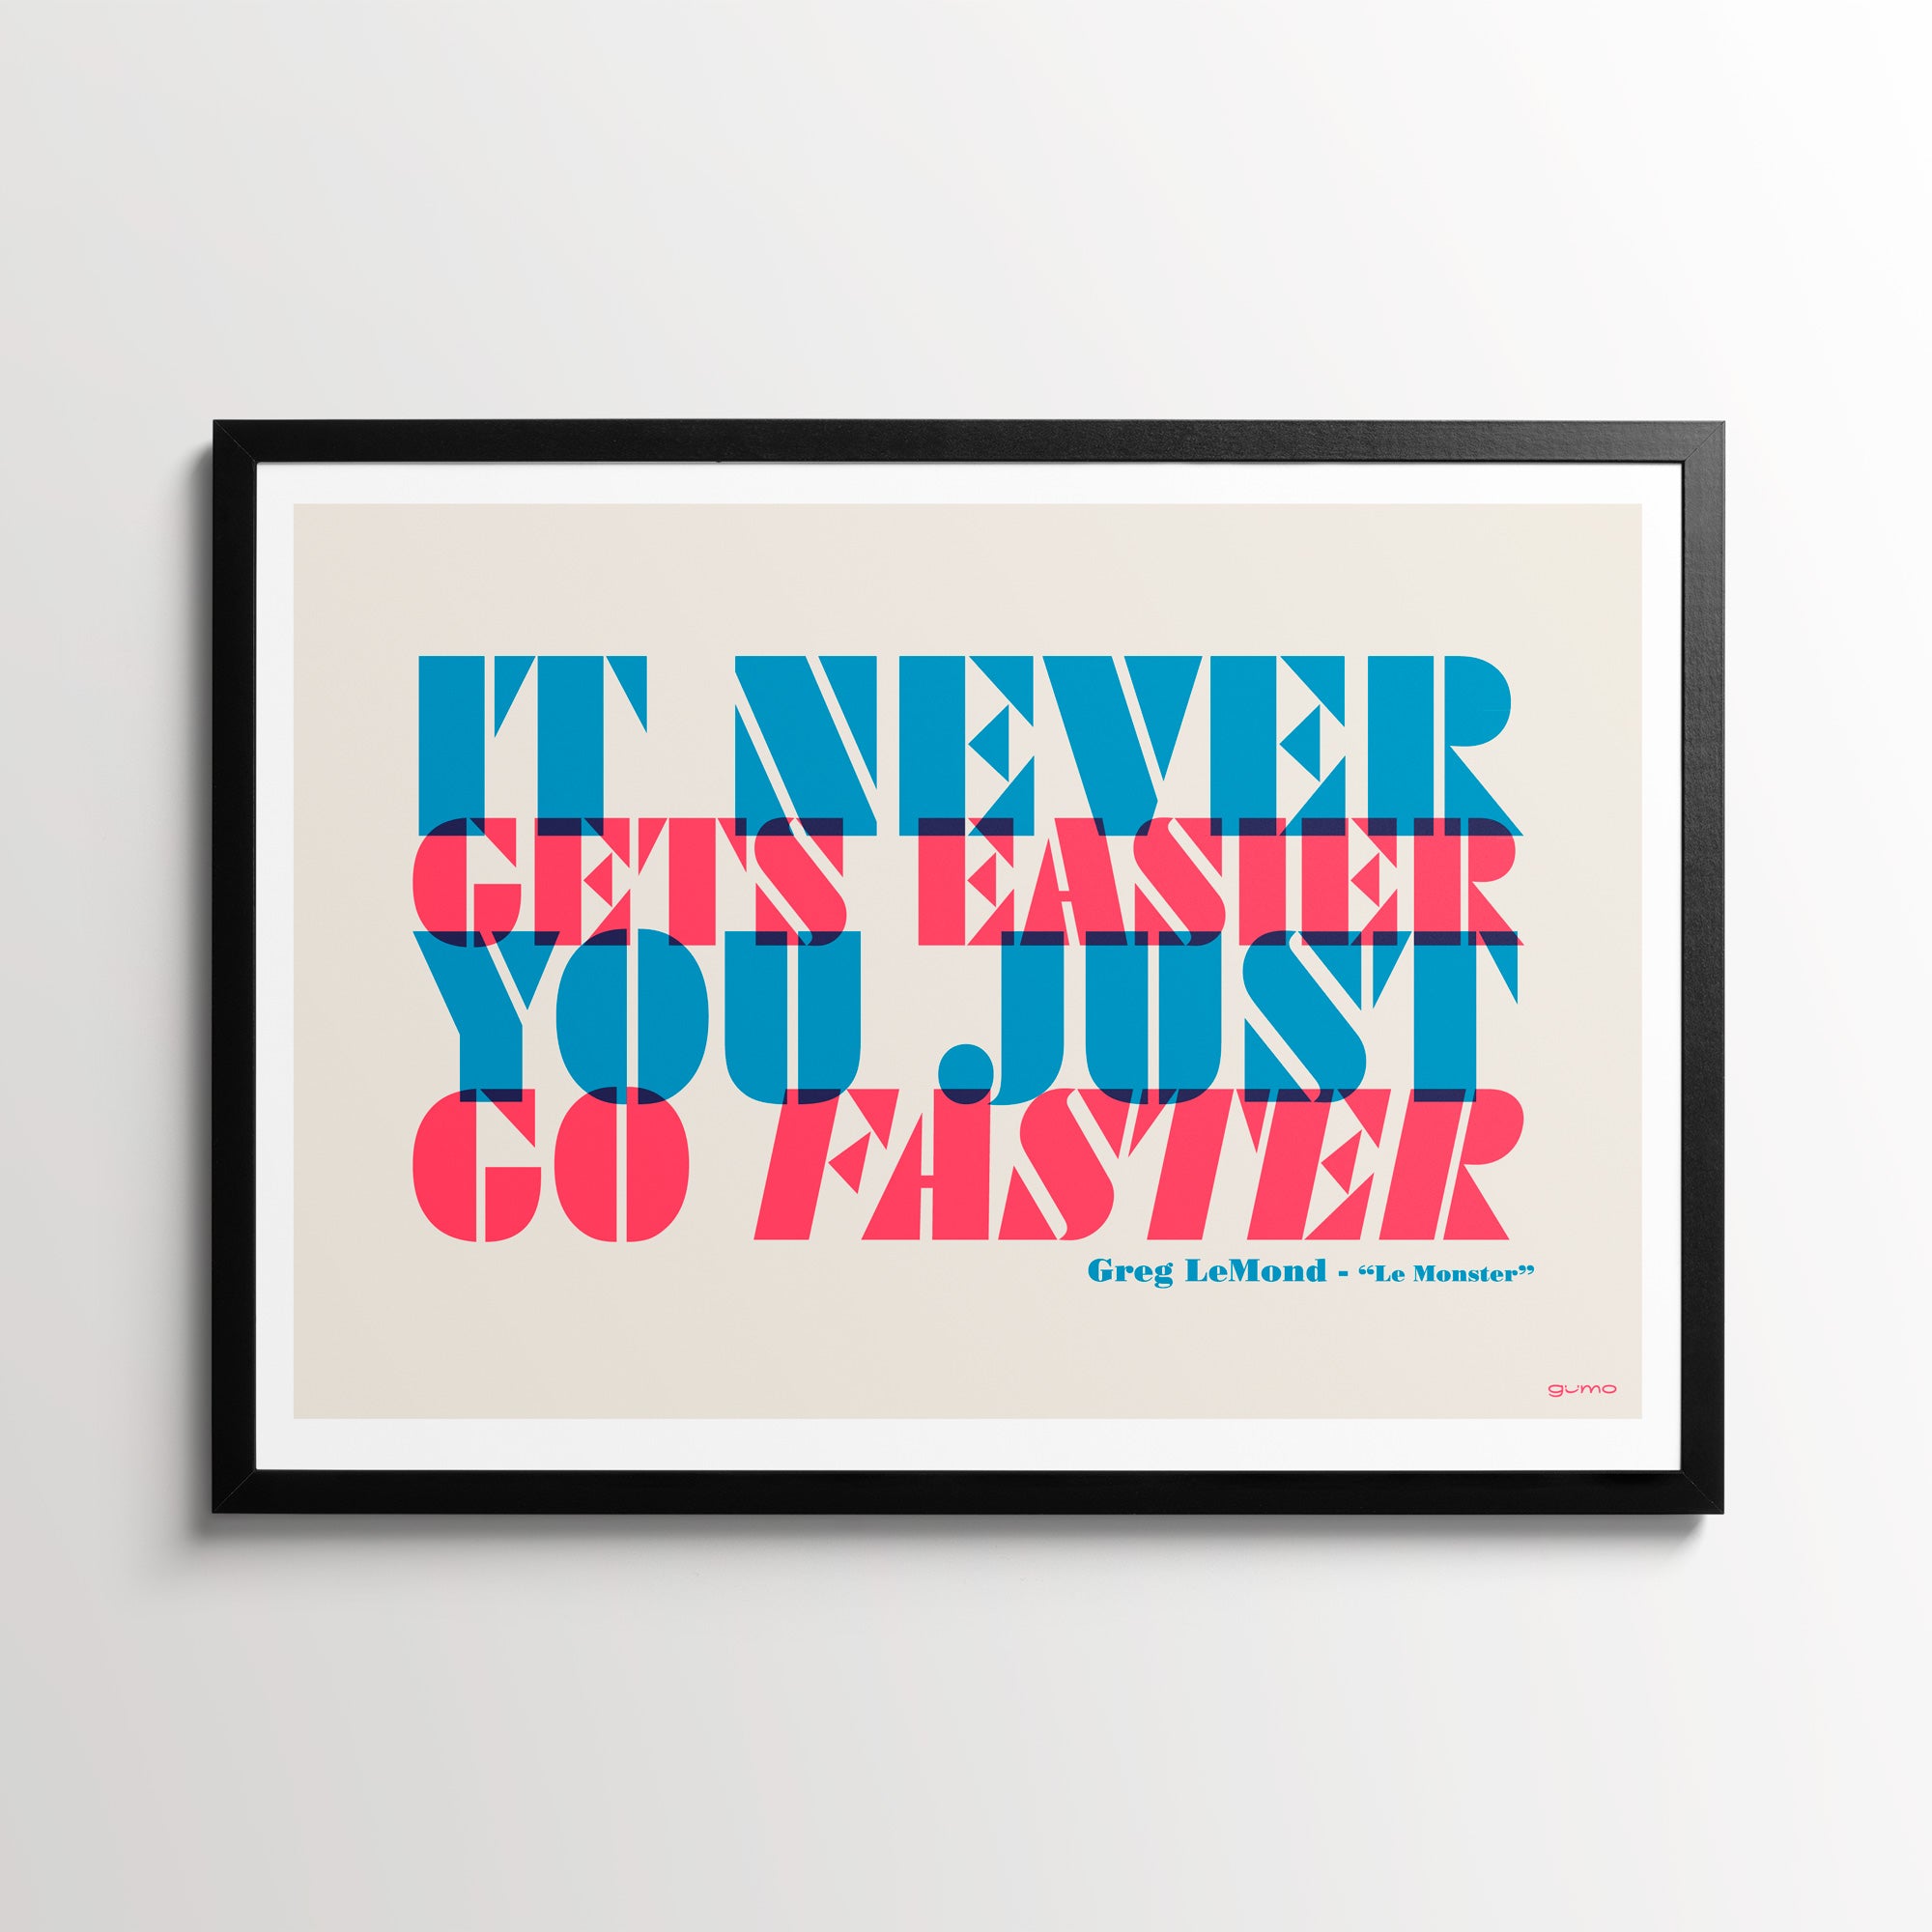 Cycling Quotes Print, Greg LeMond "It never gets easier you just go faster", with a black frame